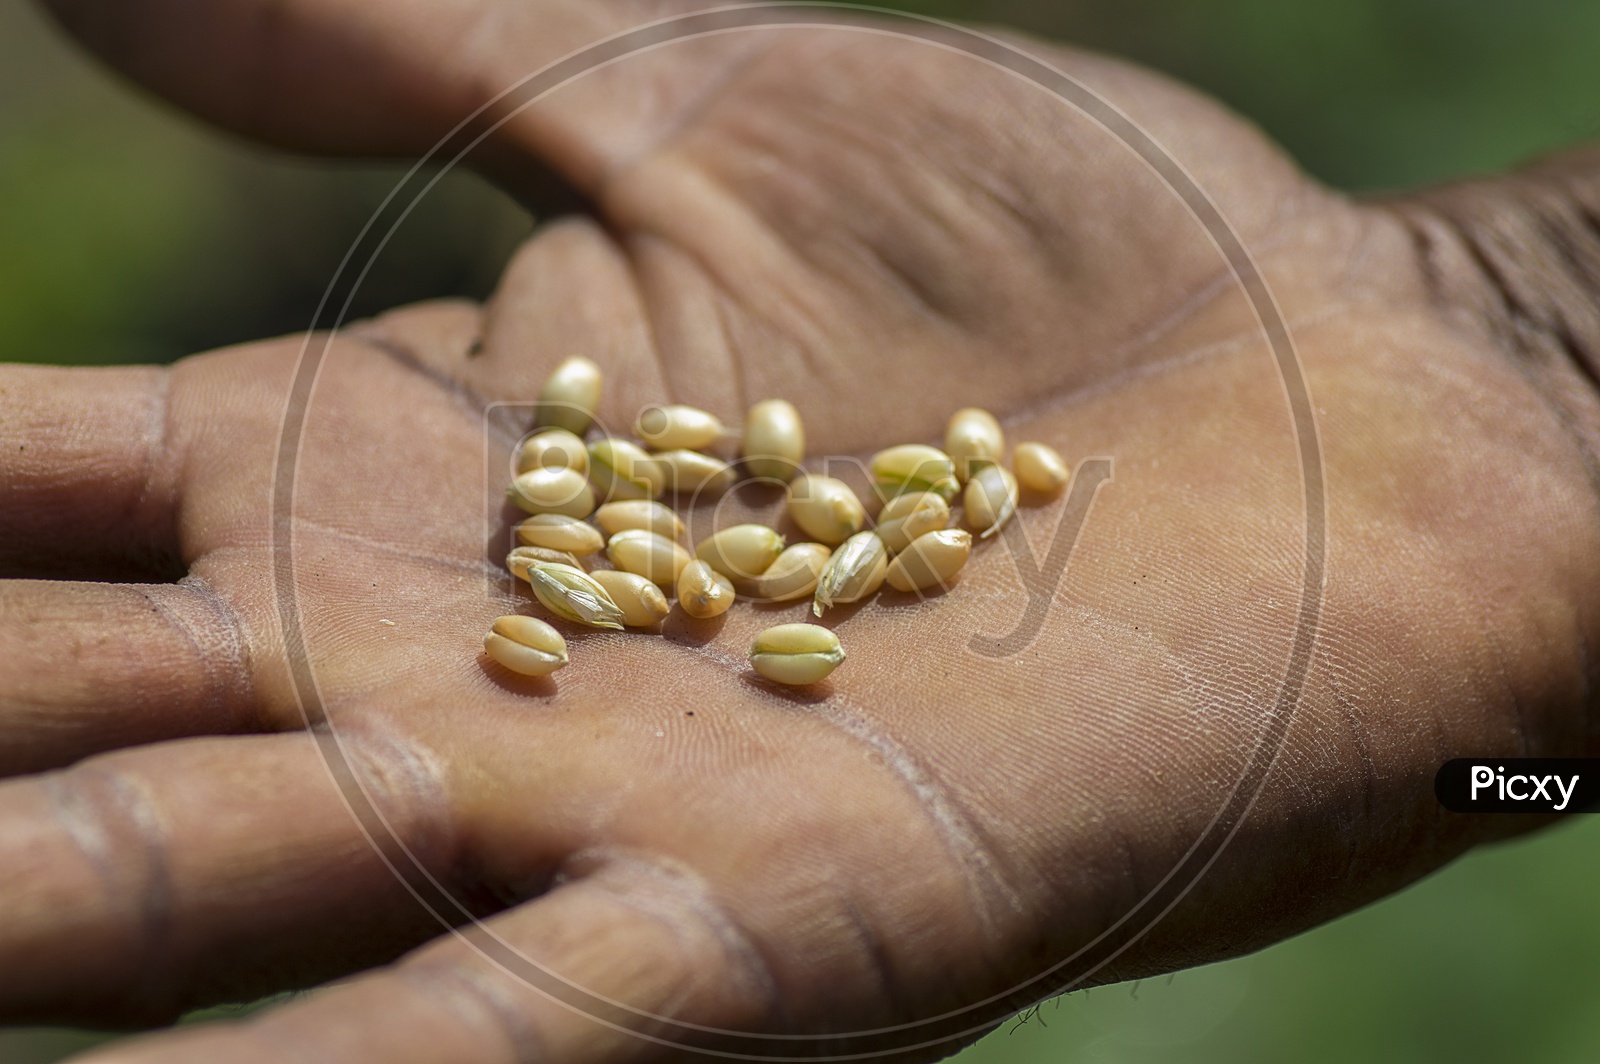 A Farmer Showing The Fresh Wheat Grains in His Hand In an Agricultural Field